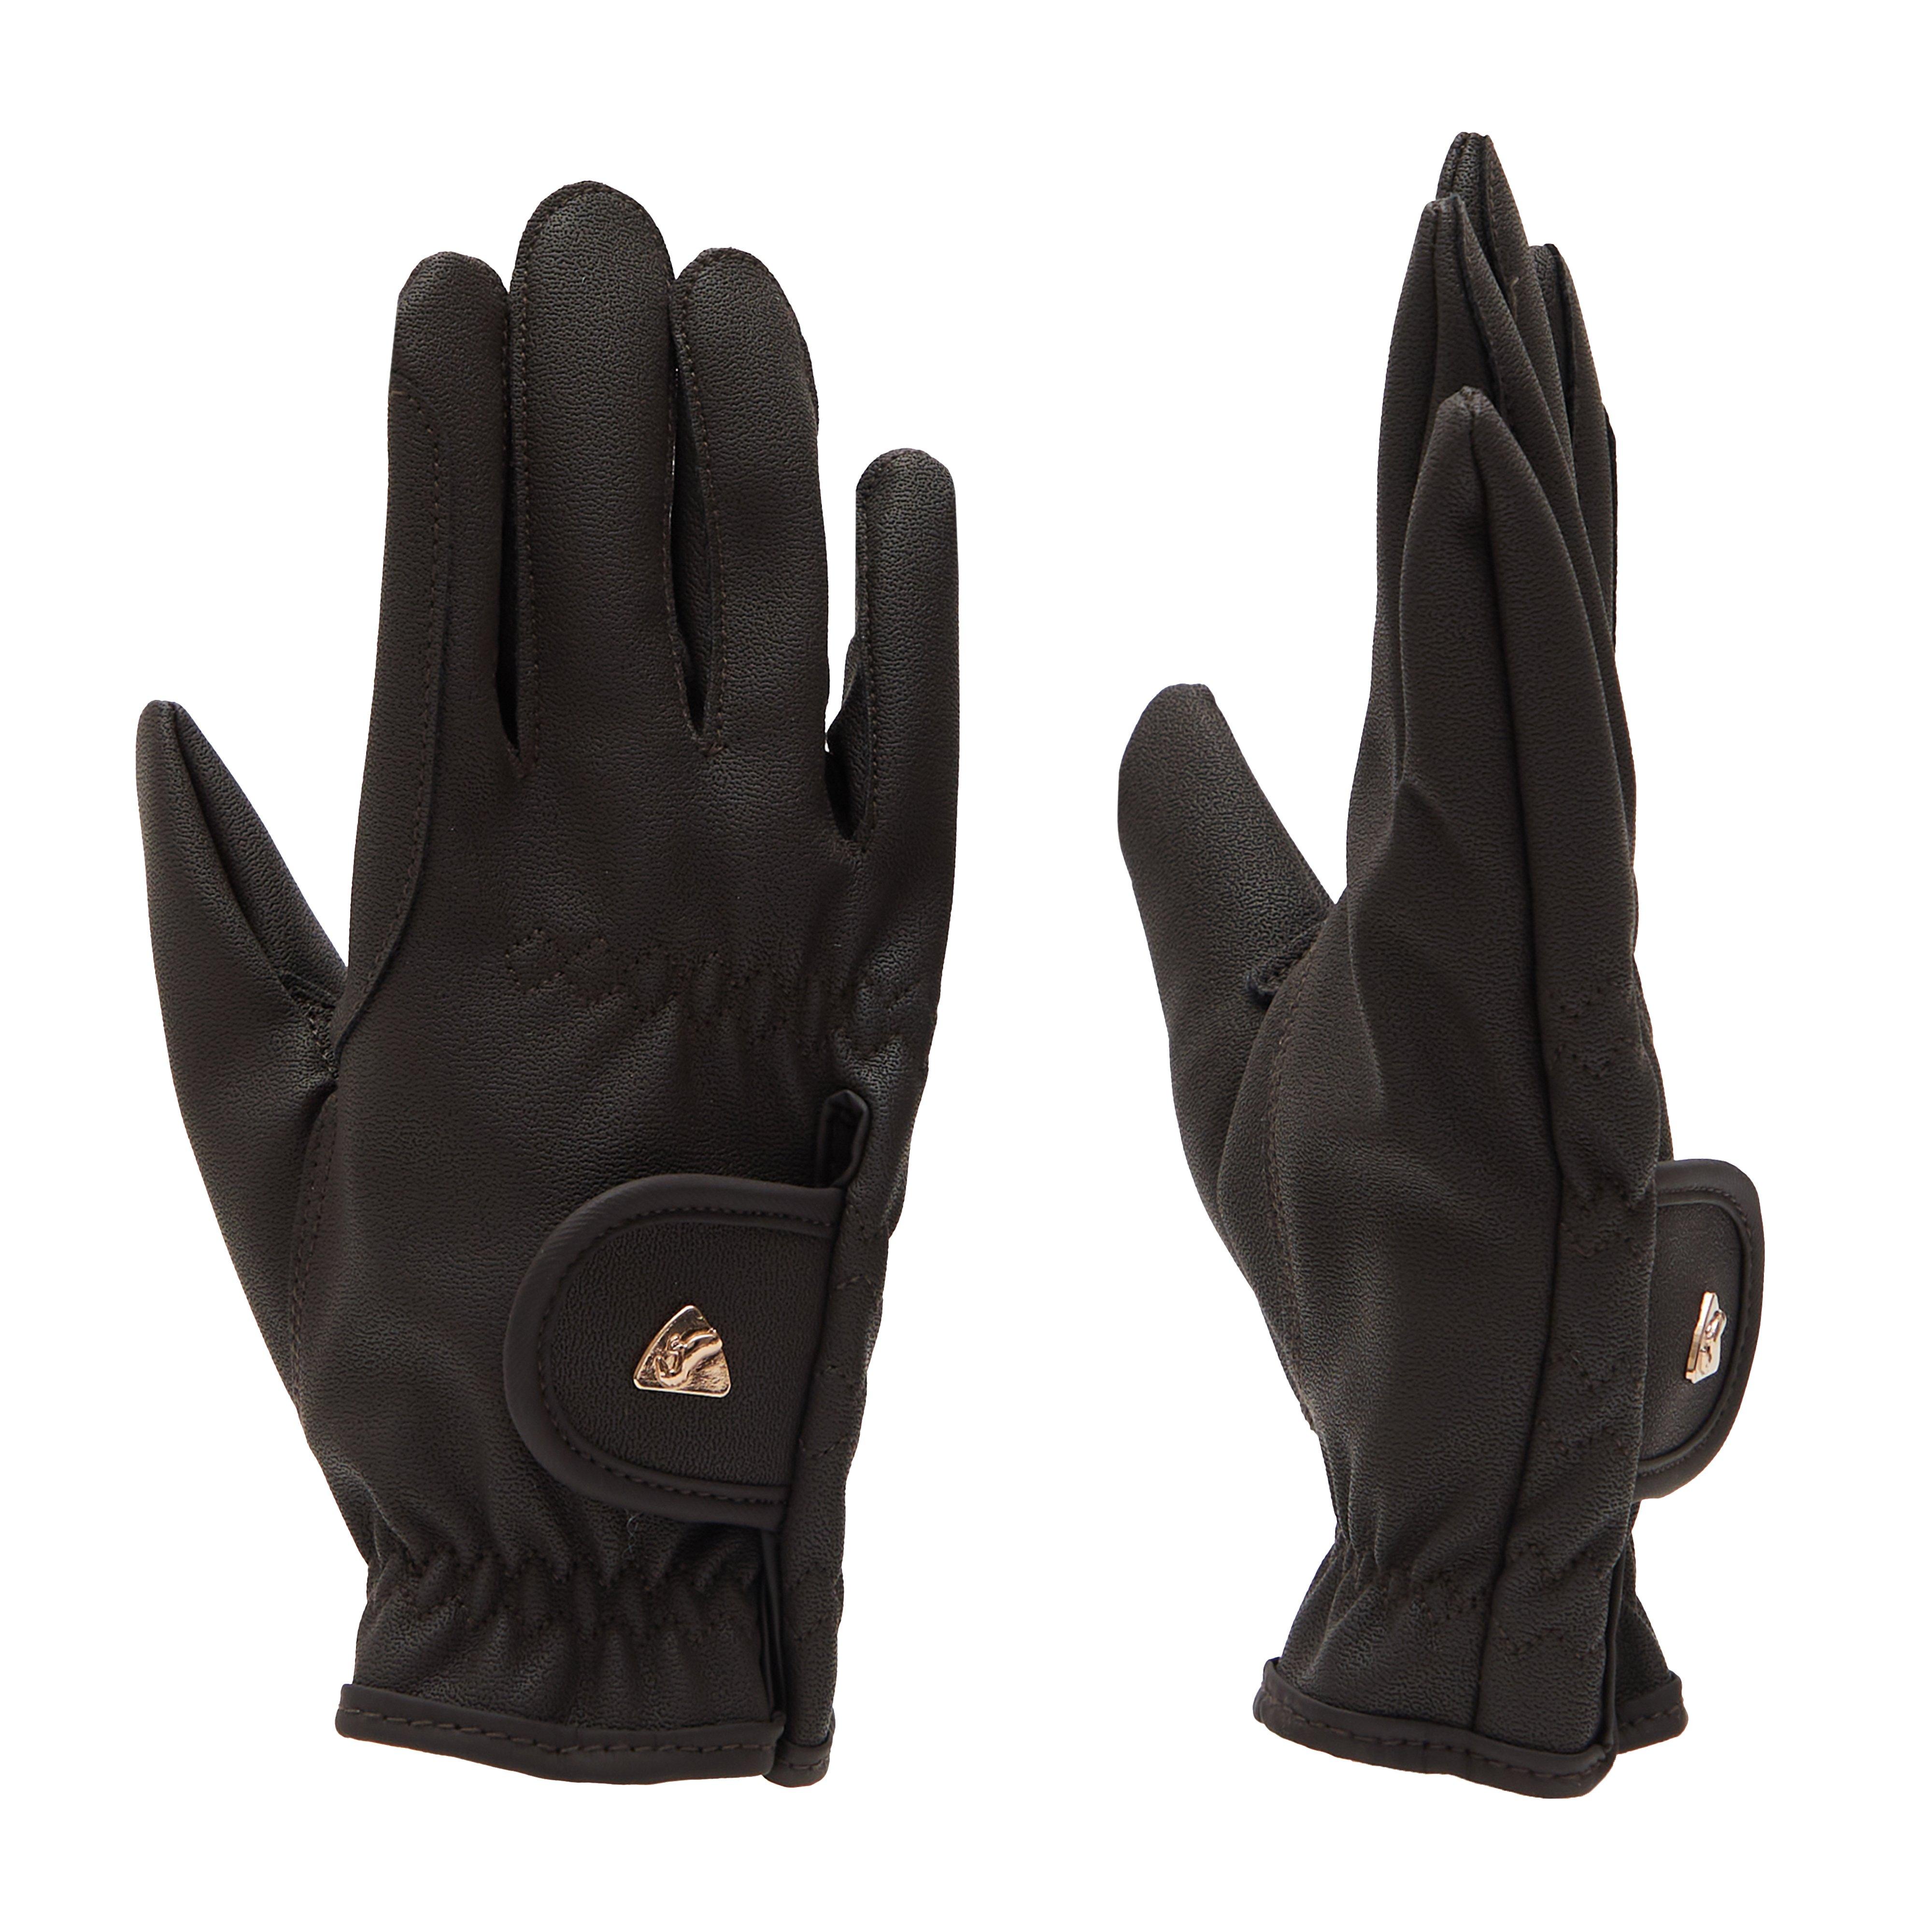 Childs PU Riding Gloves Brown